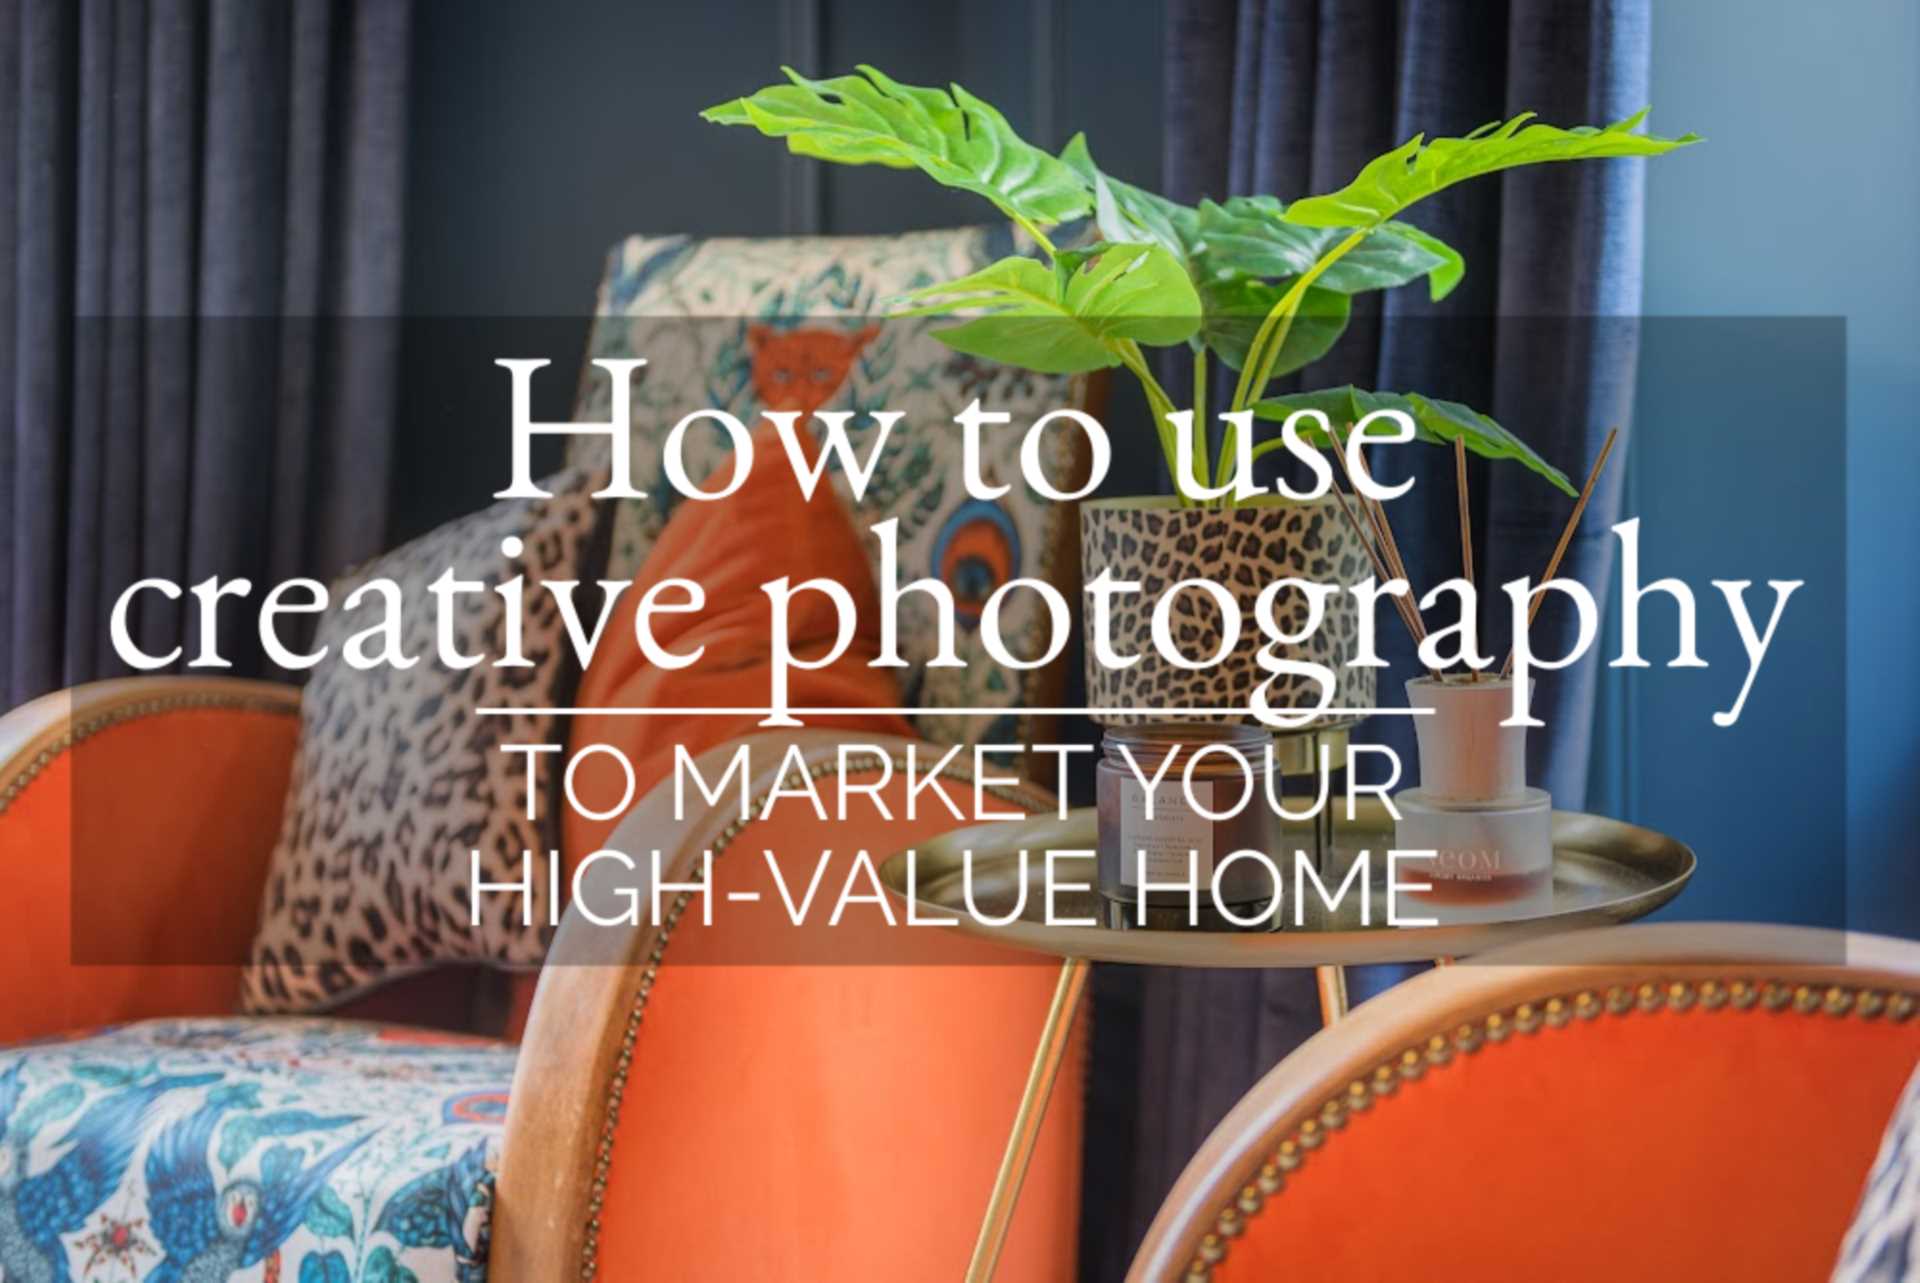 How to use creative photography: To market your high-value home